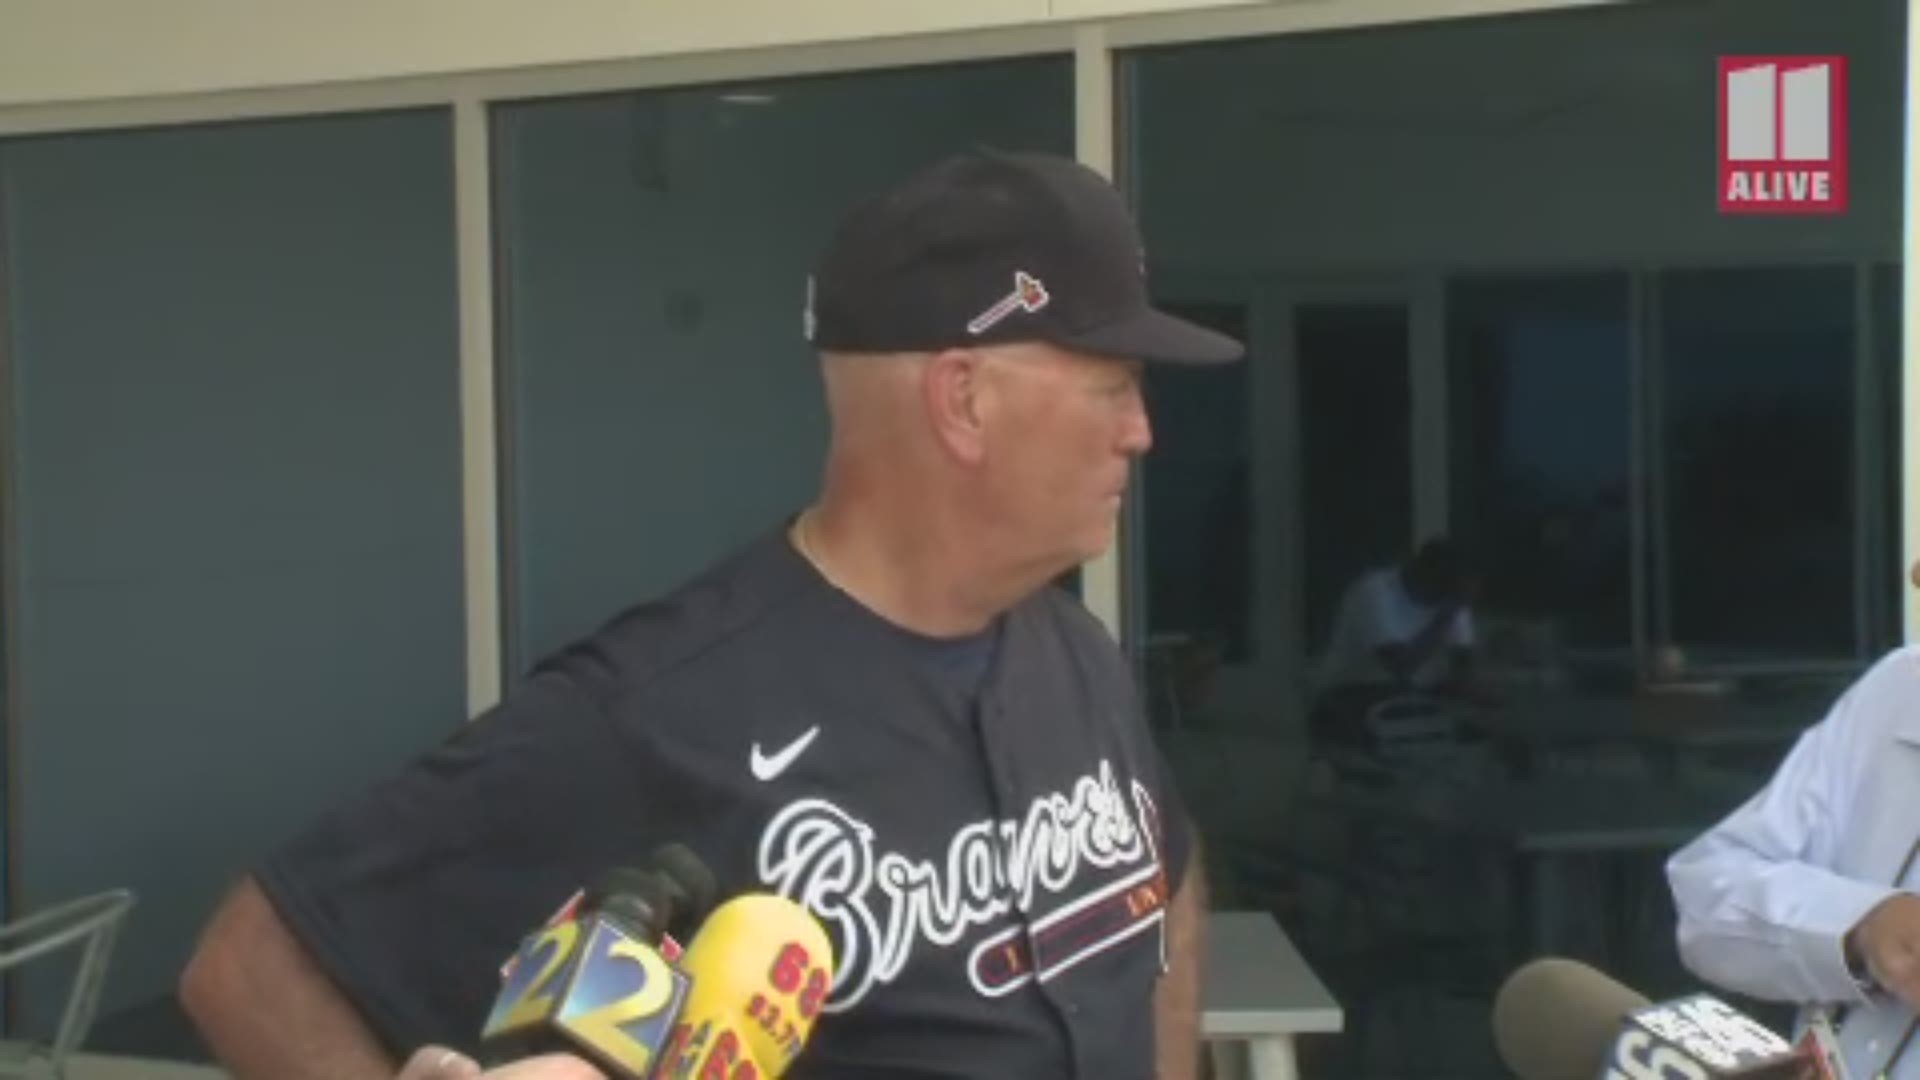 Snitker spoke to the media on Feb. 18, 2020 from Spring Training